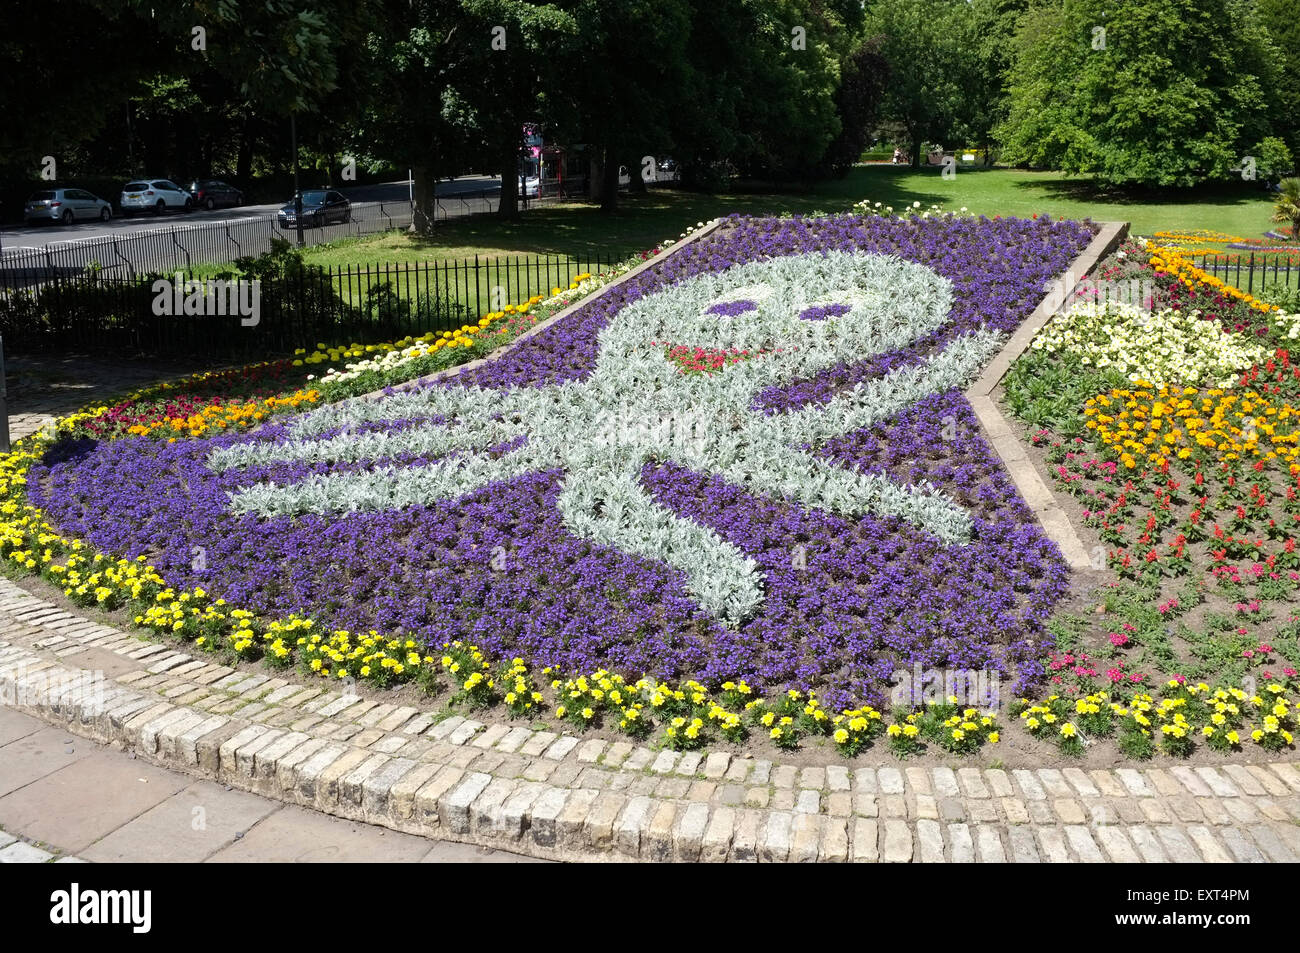 Octopus Bed of Flowers at Roundhay Park, Leeds, Yorkshire Stock Photo